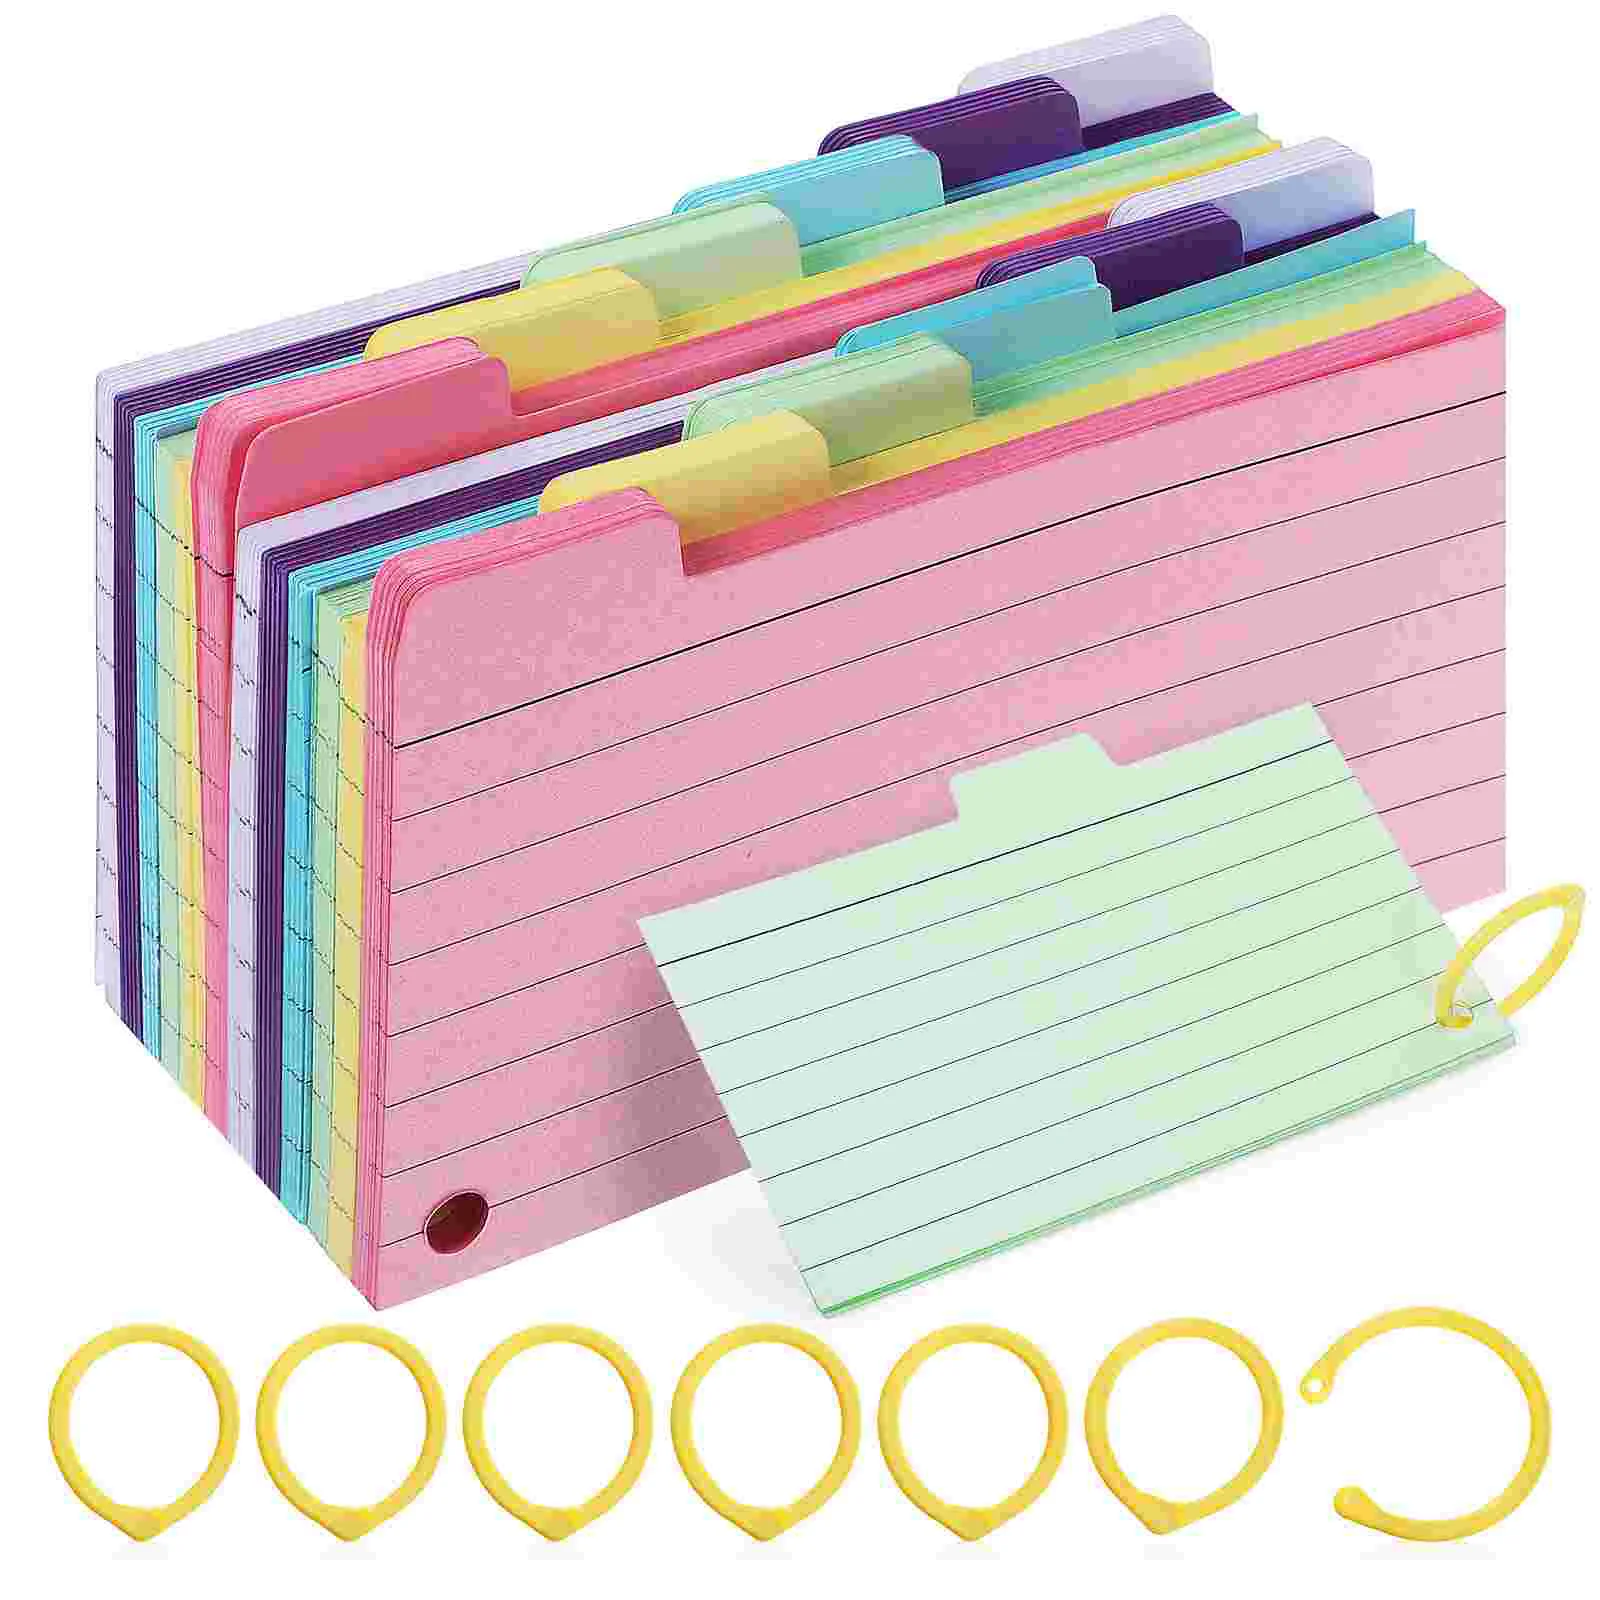 

450 Pcs Notebook Spiral Notepads Small Memo Mini Lined Study Student Fridge Lining Learning